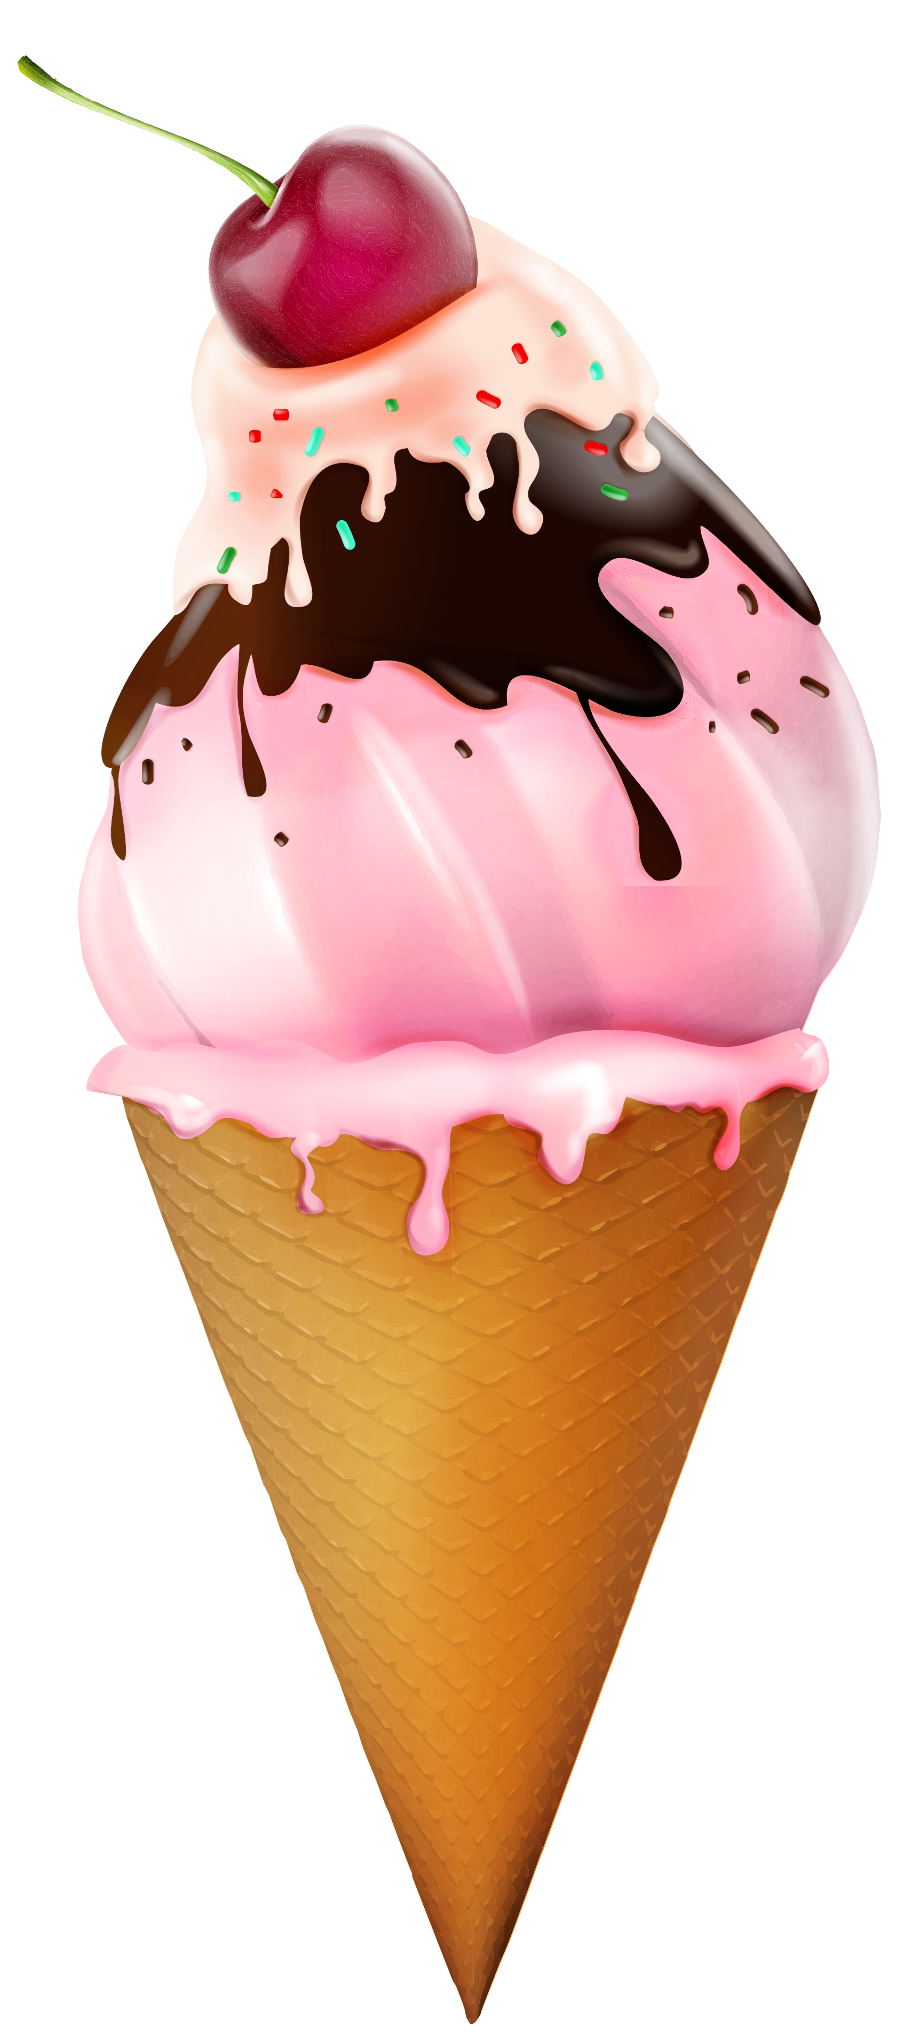 download icecream ifree slideshow maker review